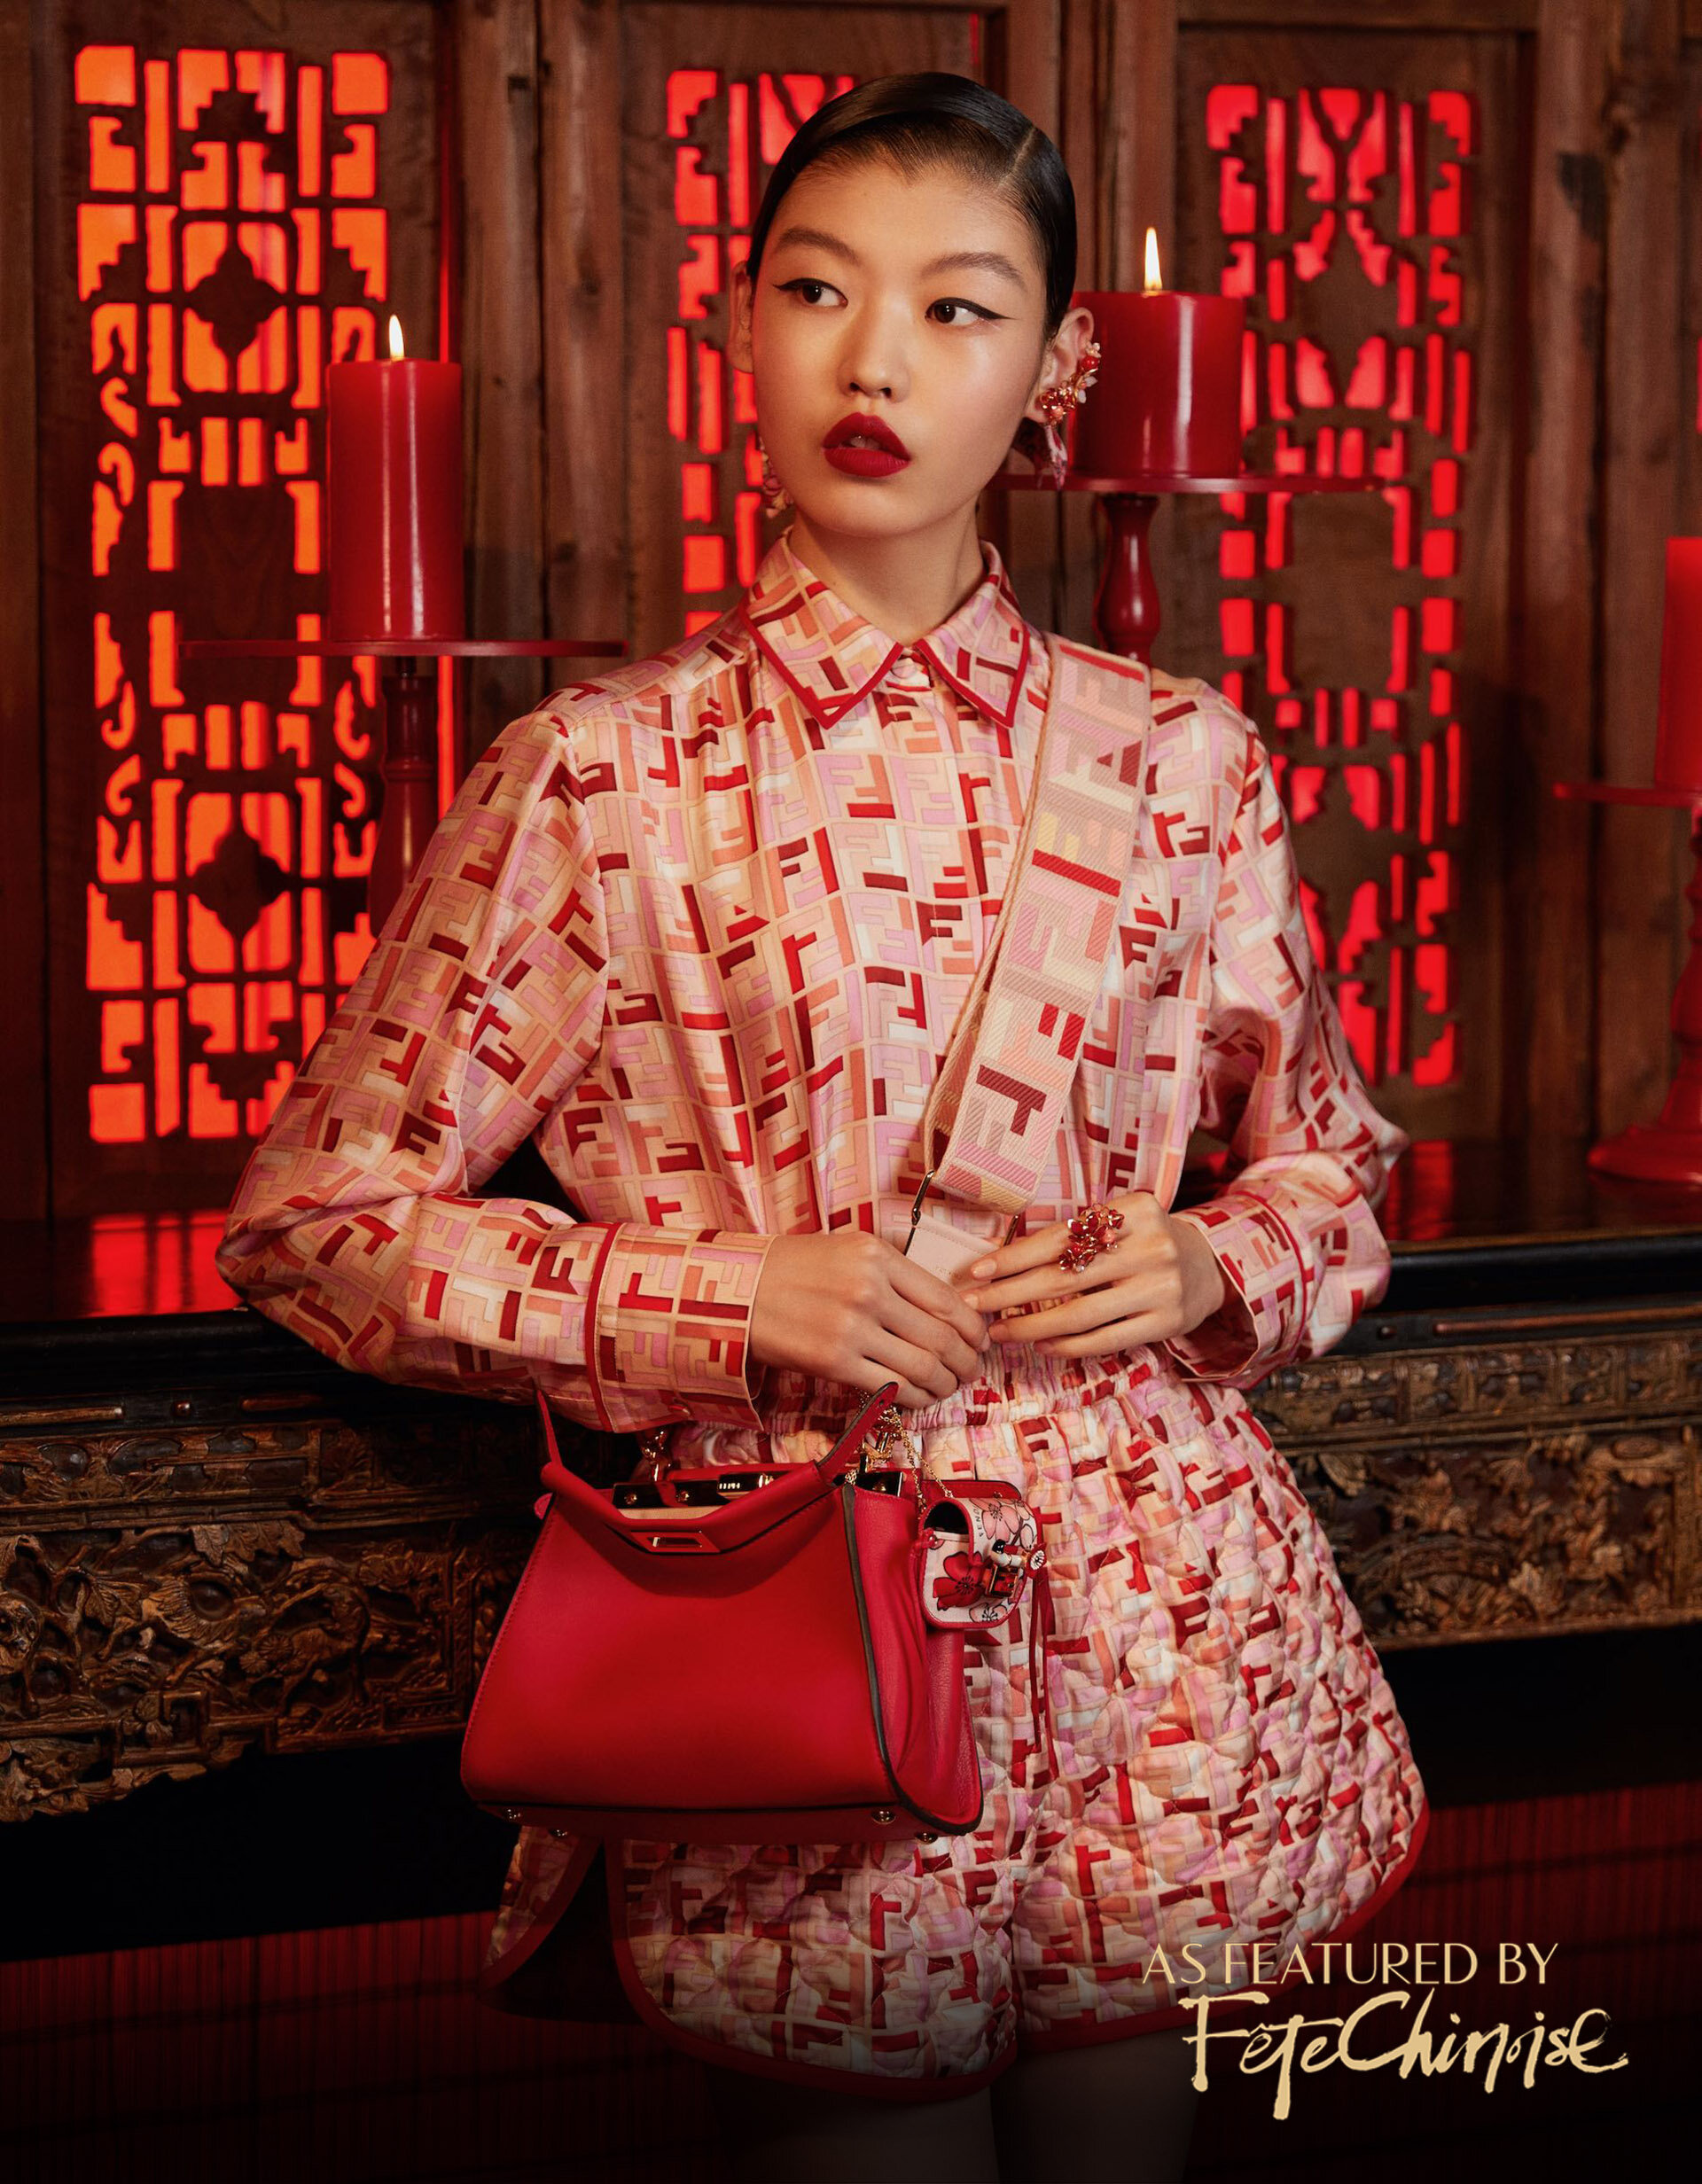 Happy Chinese New Year! - LV Clothing